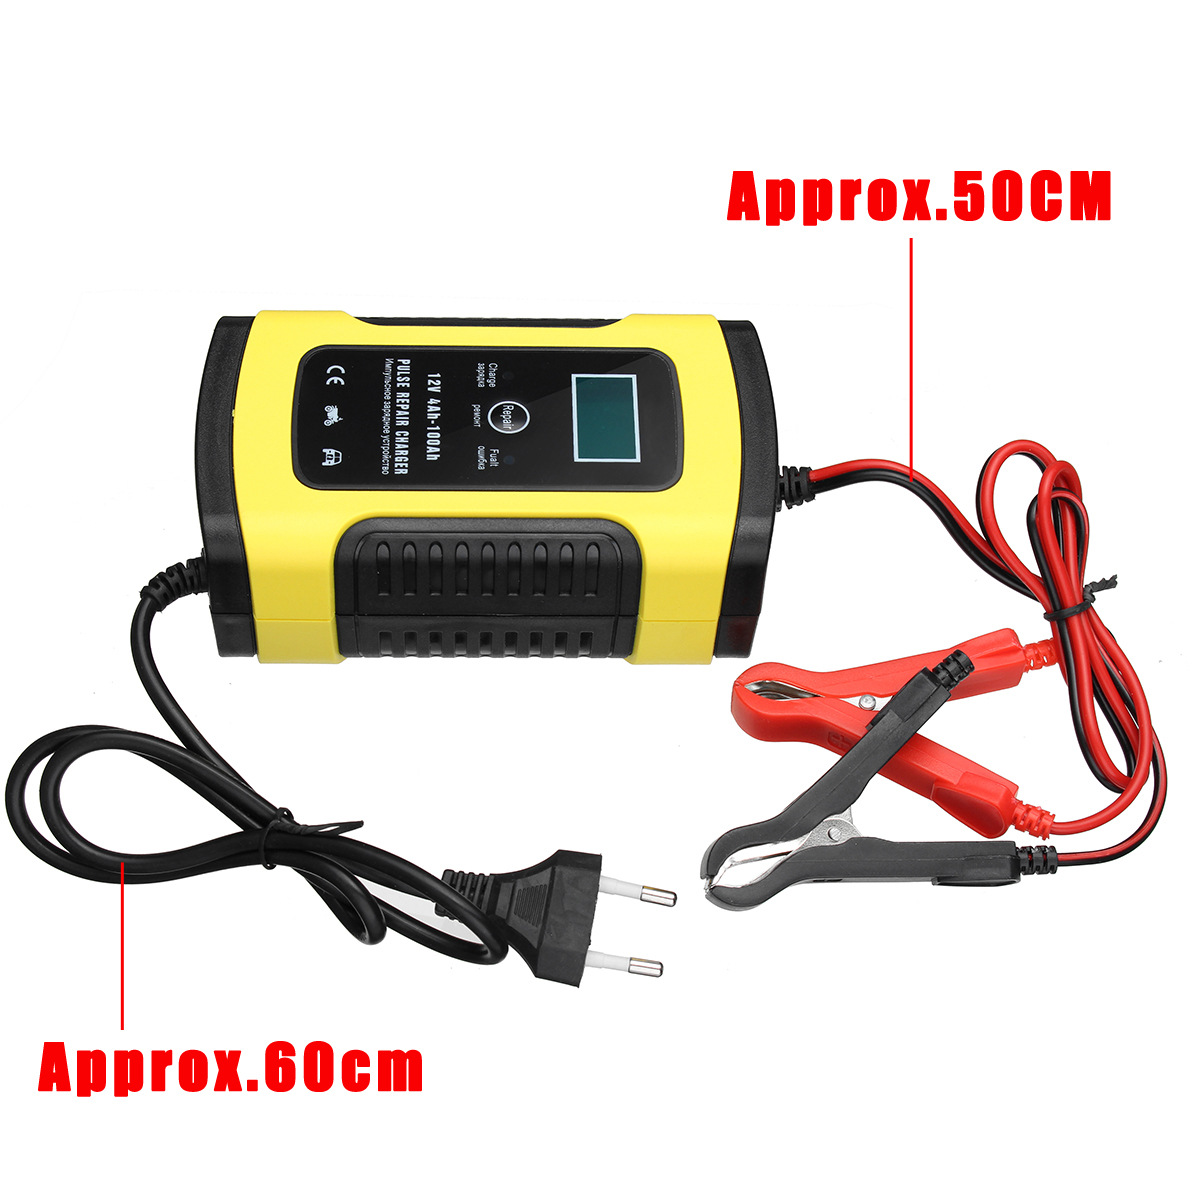 12V-5A-Pulse-Repair-Charger-with-LCD-Display-Battery-Charger-Lead-Acid-AGM-GEL-WET-Battery-Charger-1356466-9